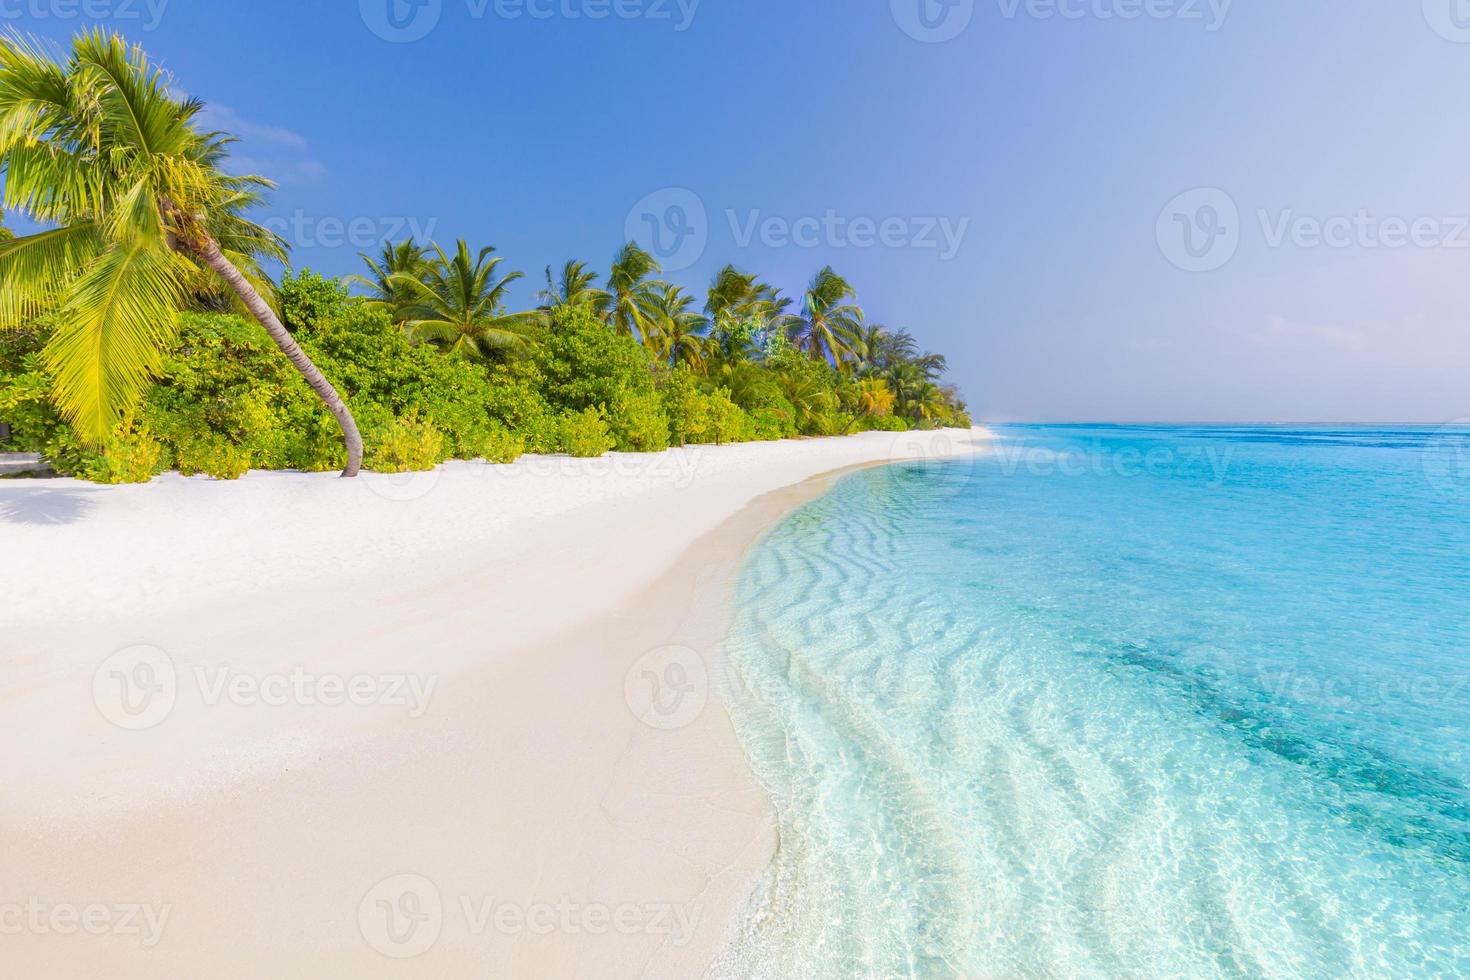 Exotic paradise. Travel, tourism and vacations concept. Palms on tropical beach landscape, luxury resort and infinity blue sea, Maldives island. Amazing, wonderful scenery, summer beach background photo